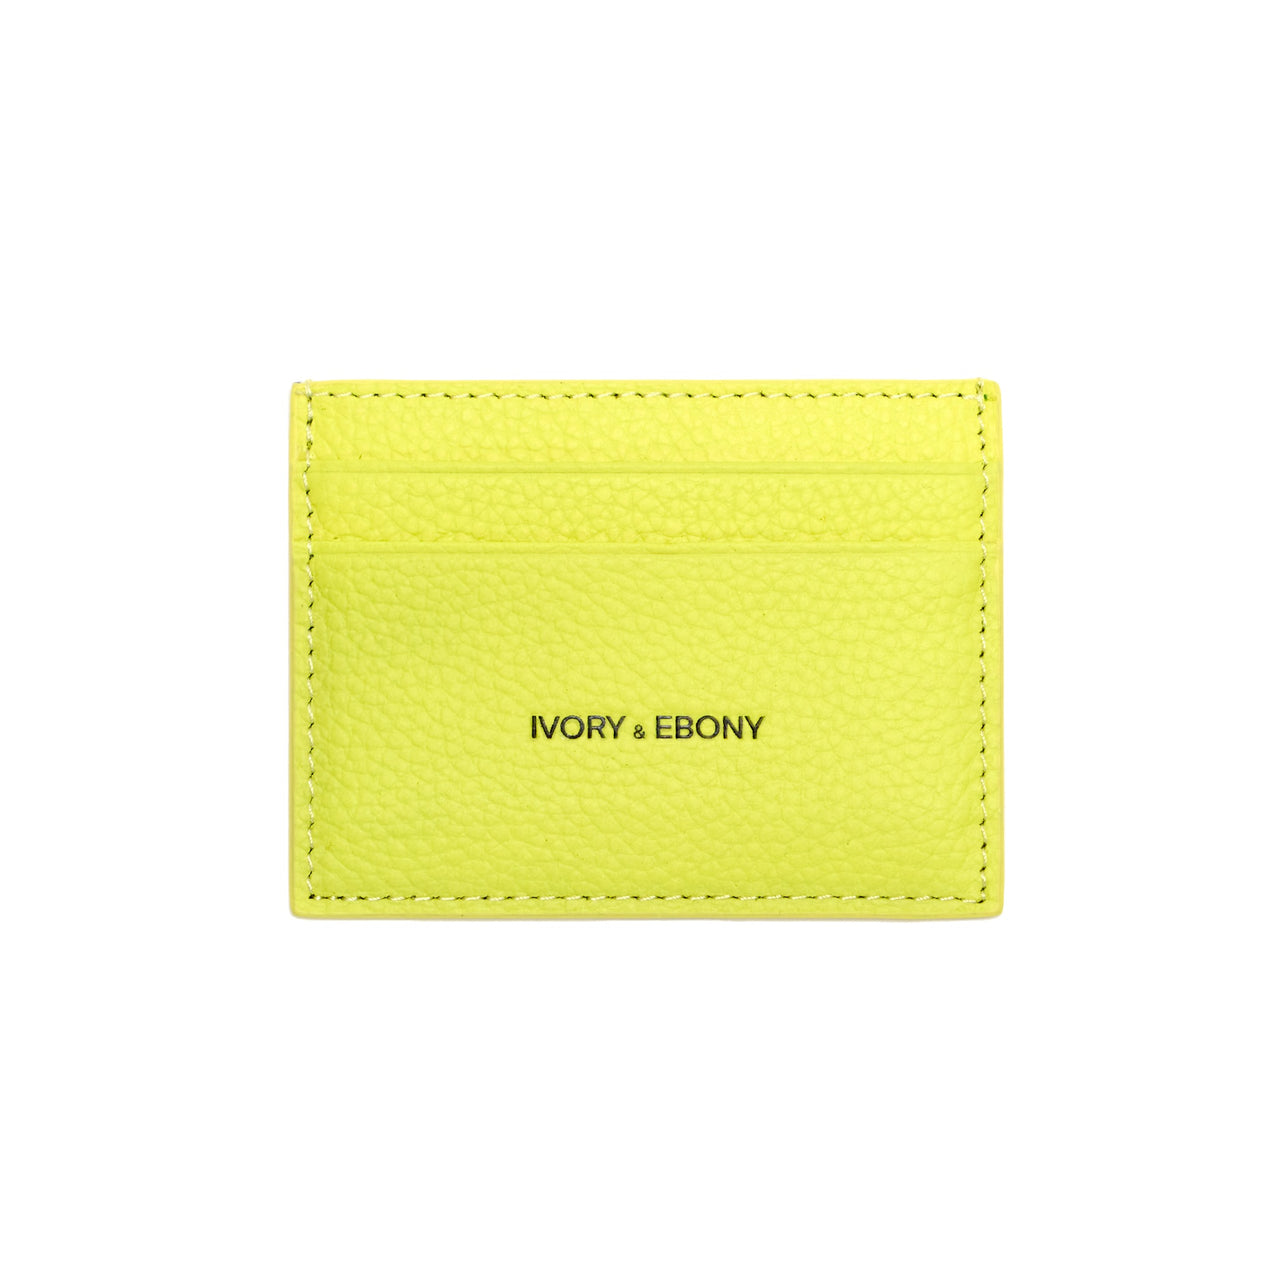 Neon Vibes, Ultimate Security: Ivory & Ebony Wallet in Bright Neon - Crafted from 100% Genuine Leather, RFID Blocking - Illuminate Your Everyday Carry.